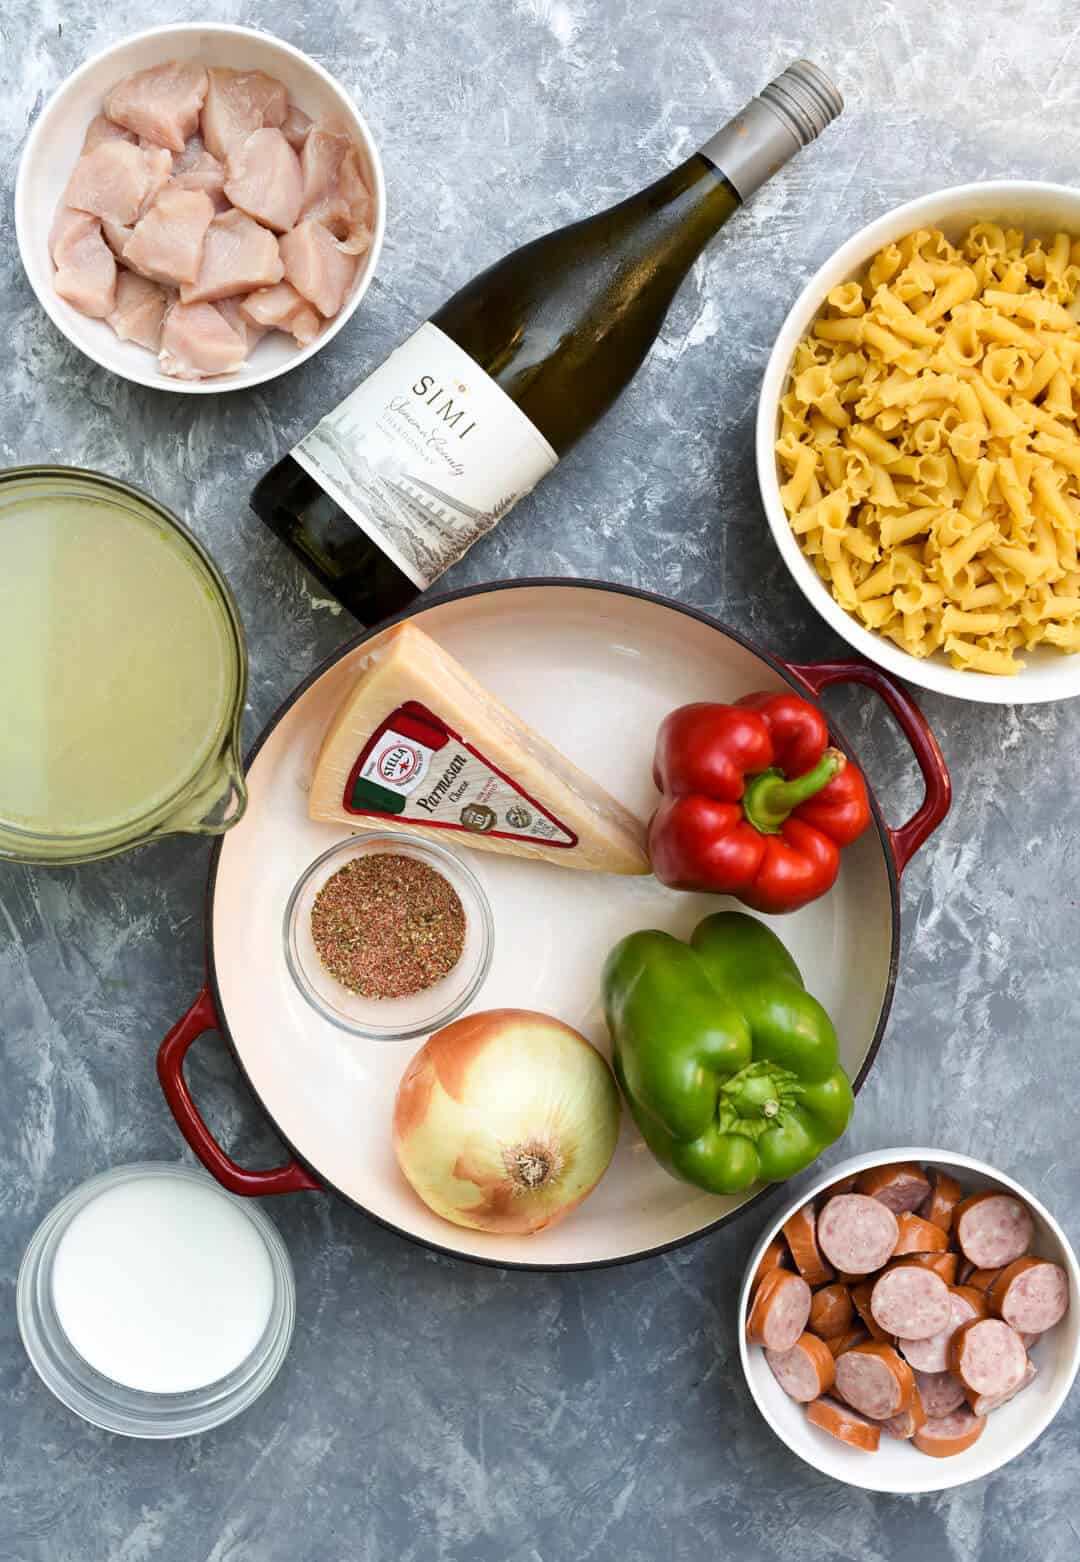 The ingredients for Cheesy Cajun Pasta on a grey surface.